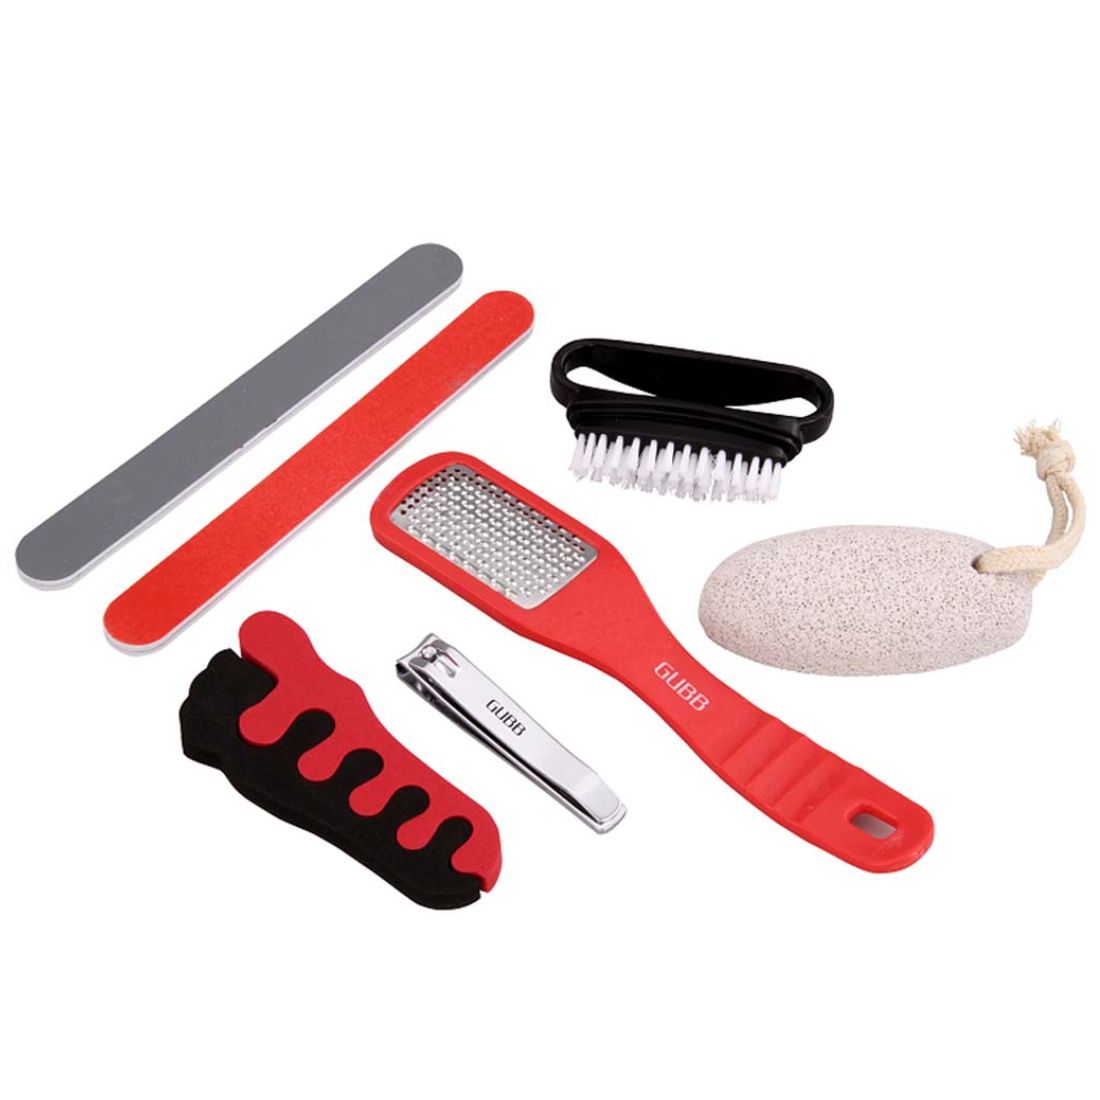 Buy GUBB Pedicure Kit 7 In 1 - Nail Clipper, Pumice Stone, Nail Buffer, Nail Brush, Foot Rasp & Toe Spacer (color may very) - Purplle